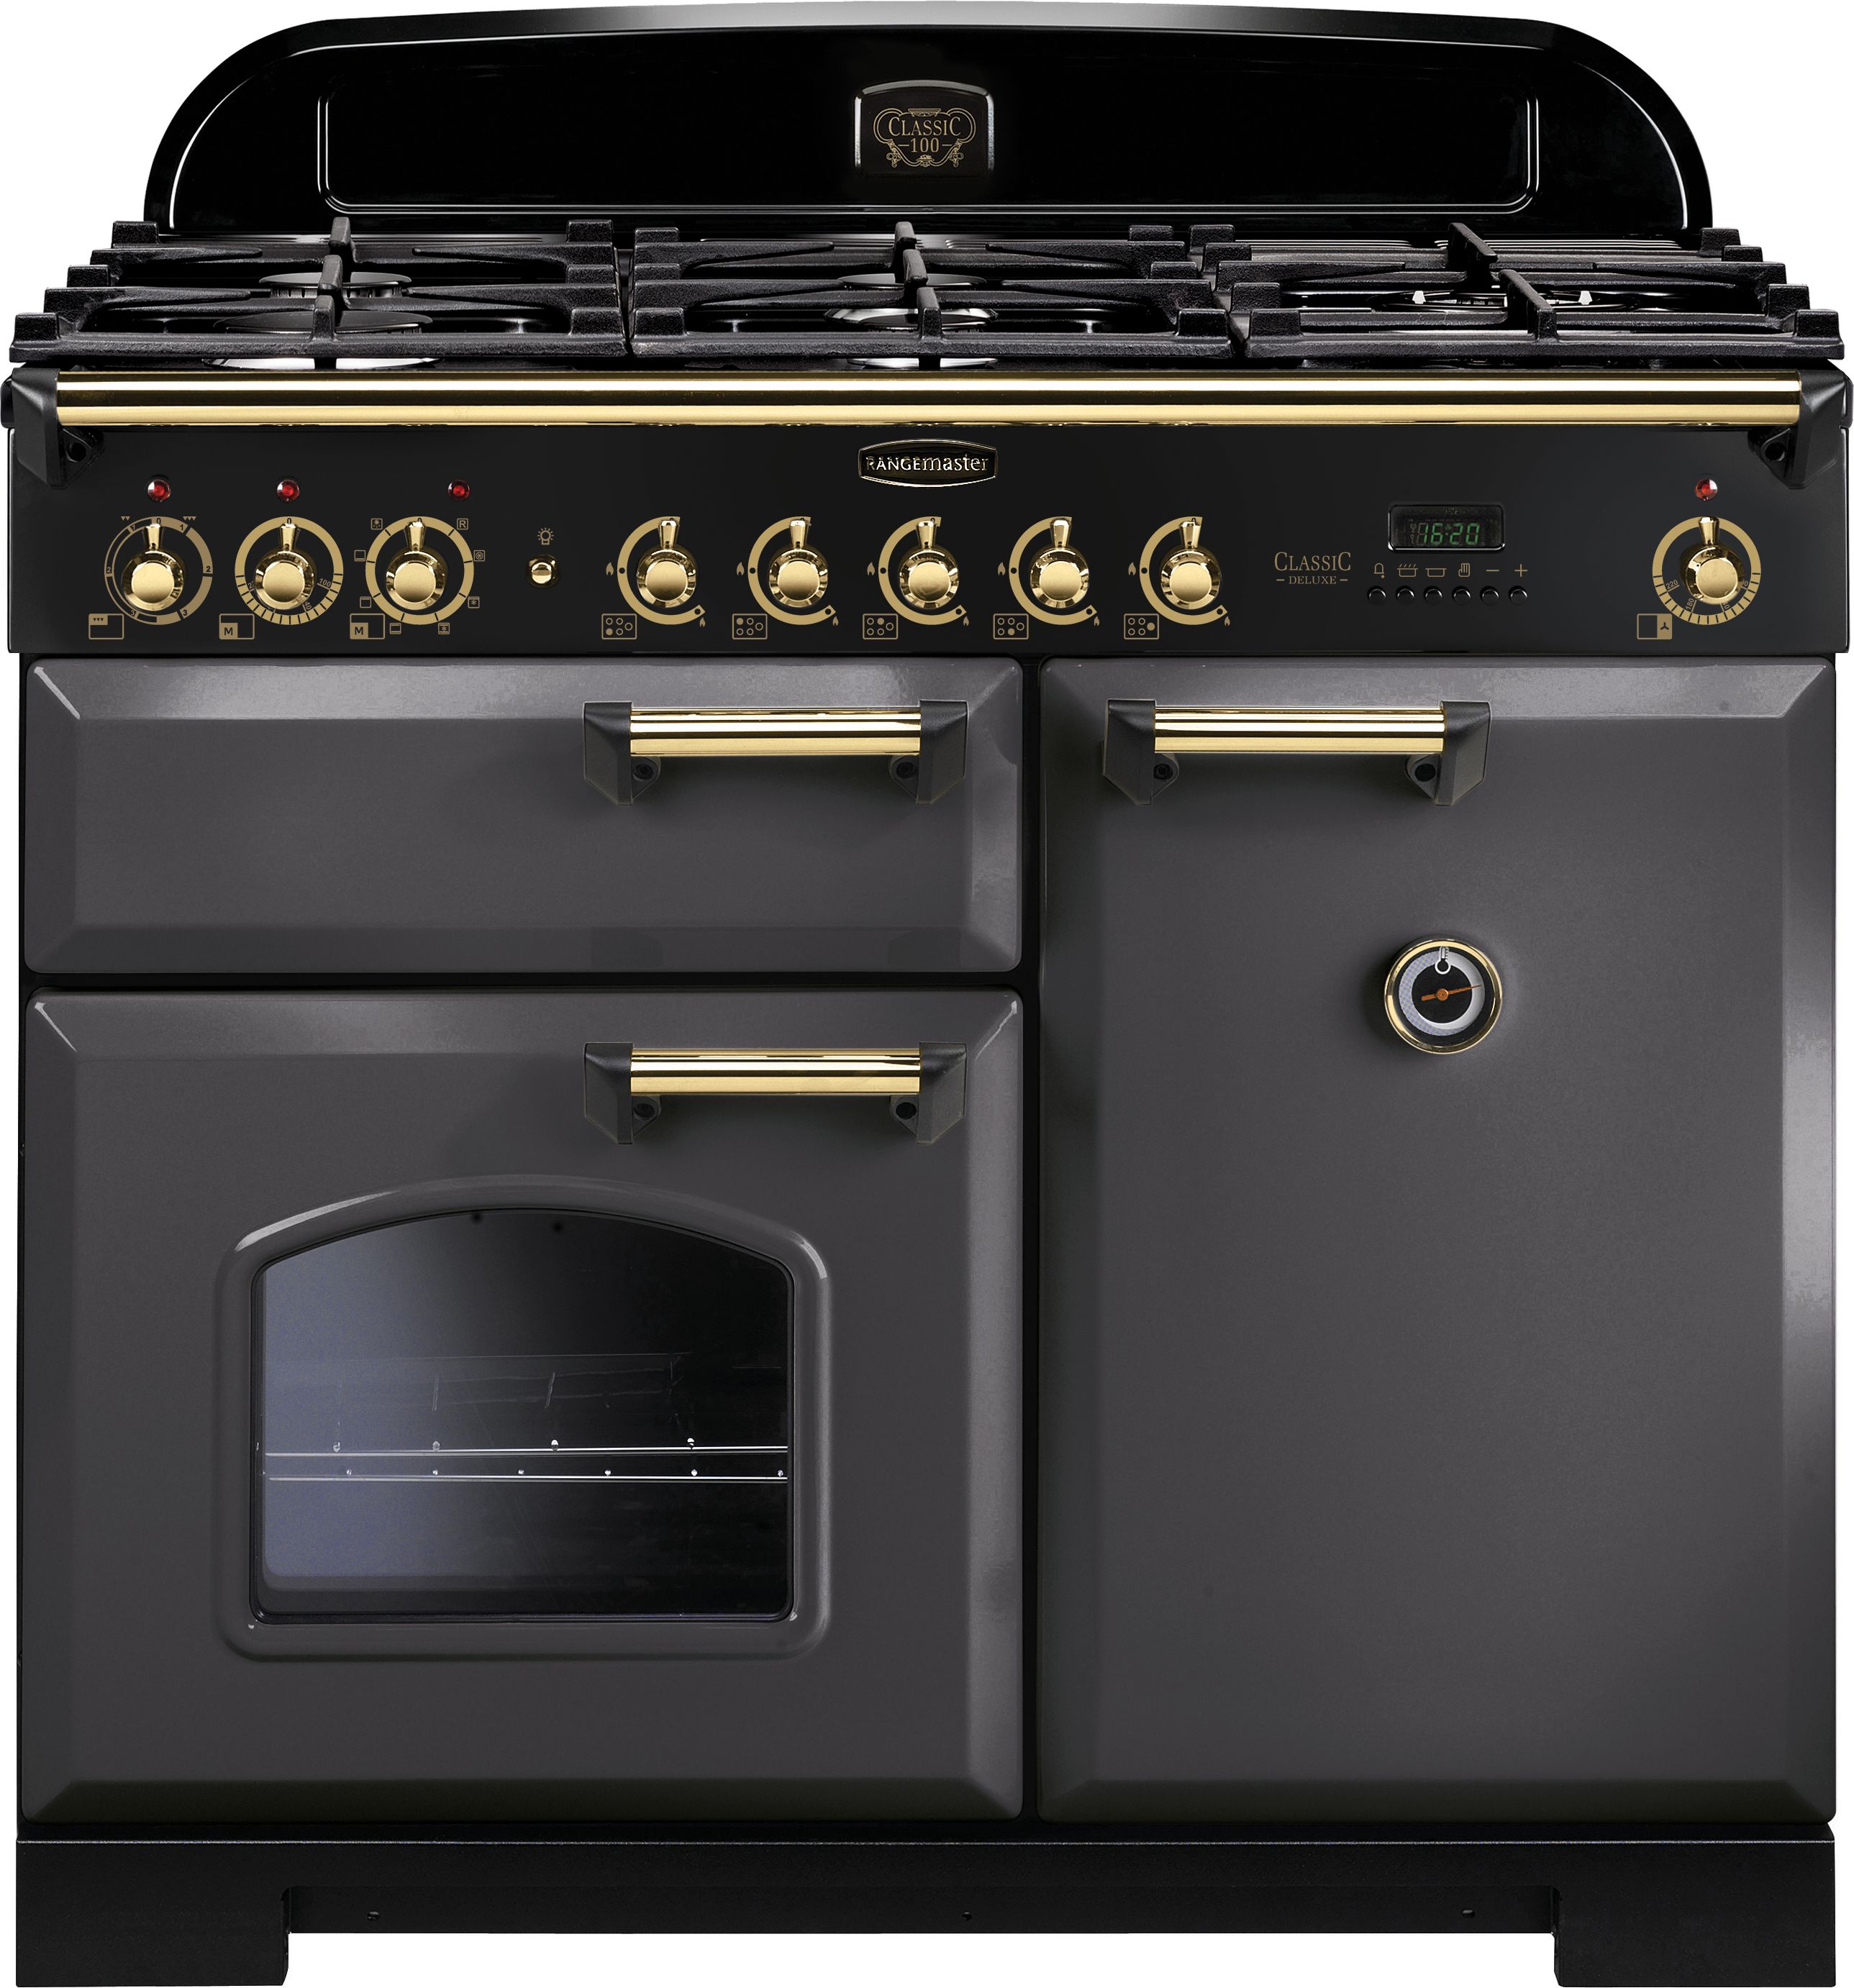 Rangemaster Classic Deluxe CDL100DFFSL/B 100cm Dual Fuel Range Cooker - Slate / Brass - A/A Rated, Grey